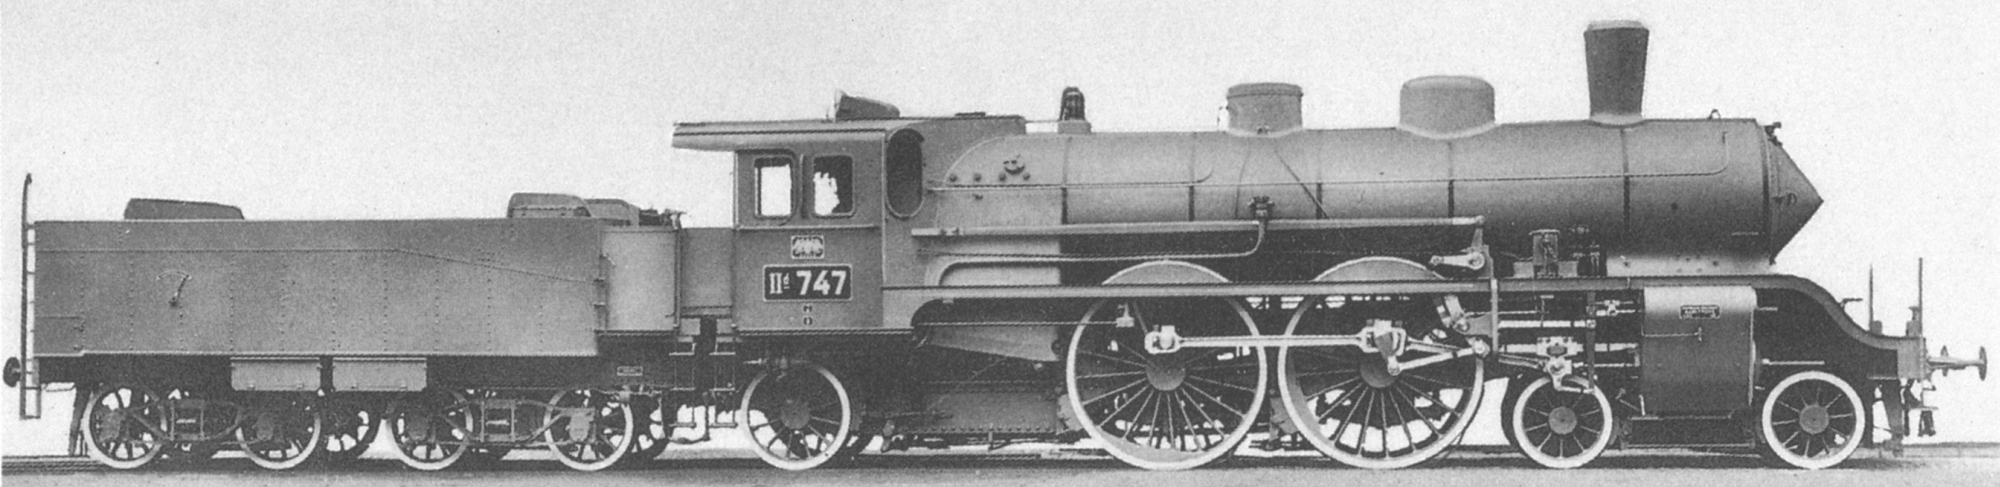 No. 747 when delivered in 1905